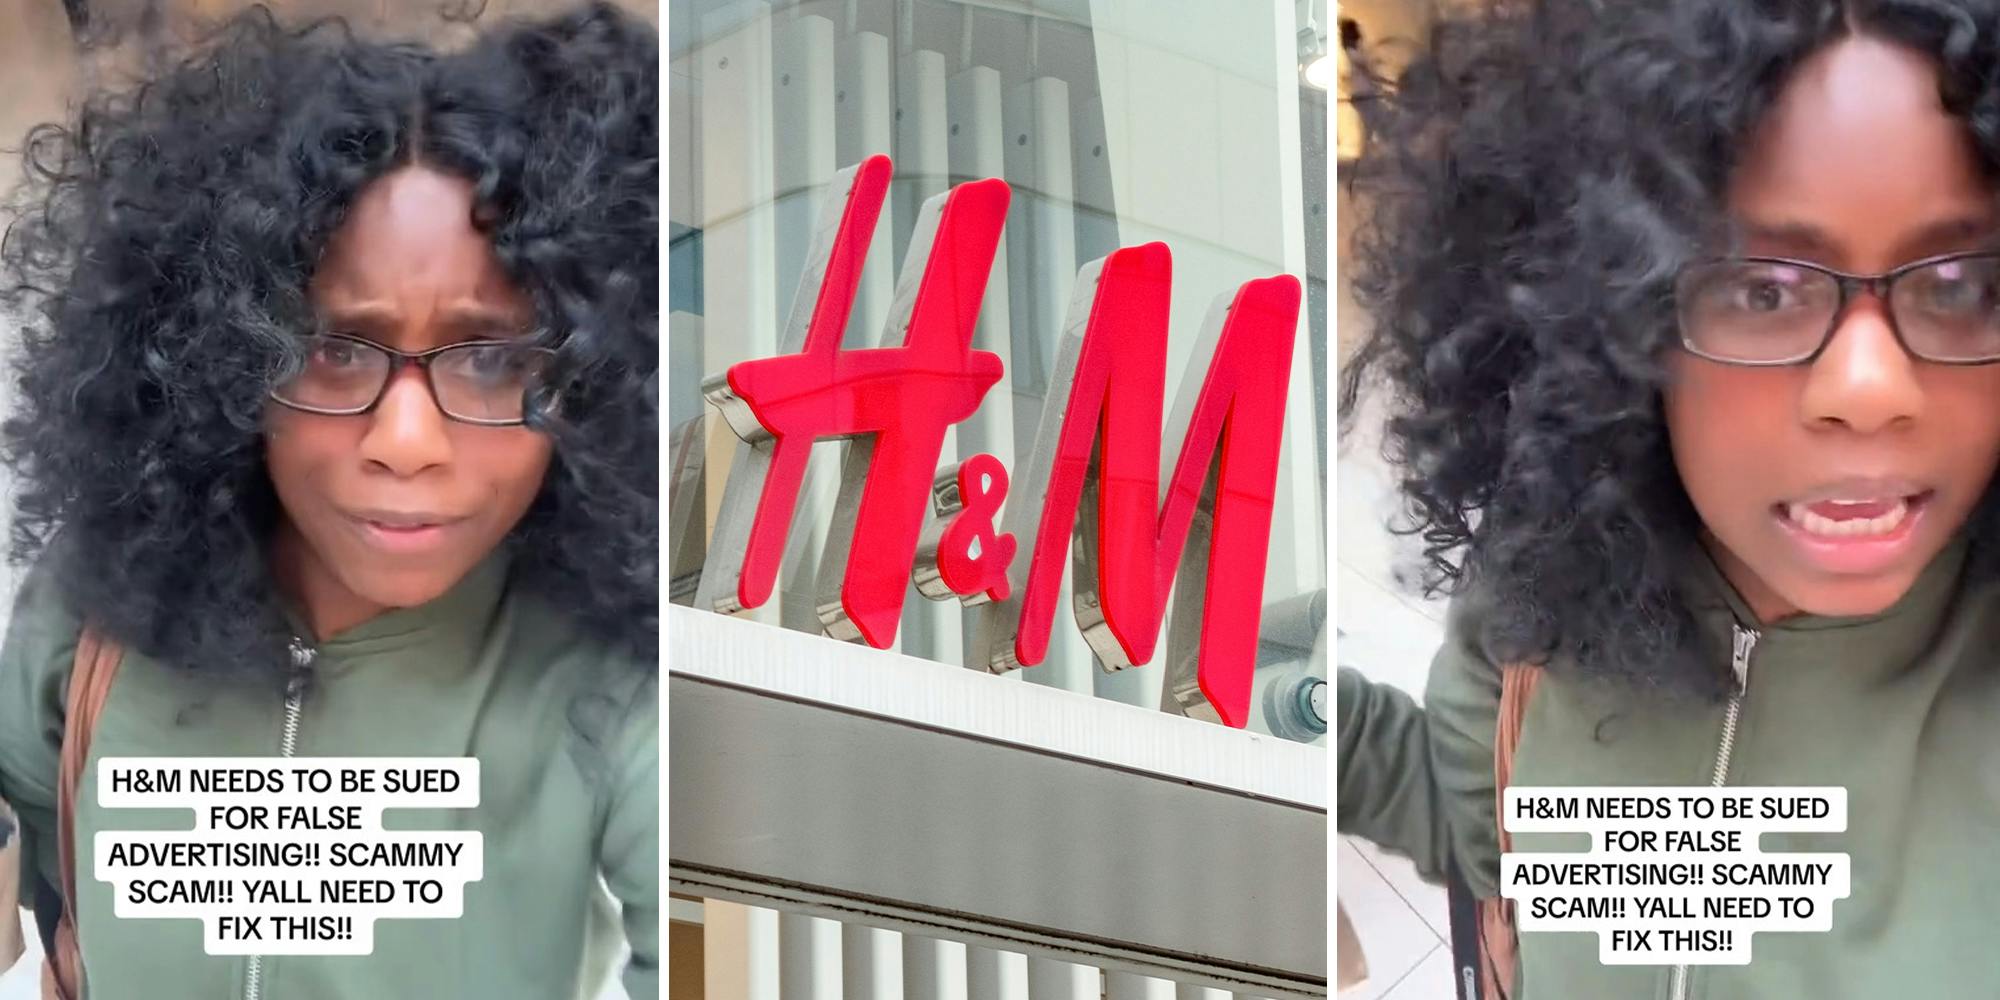 Shopper slams H&M for ‘false advertising’ after waiting in line for 4 hours for gift cards